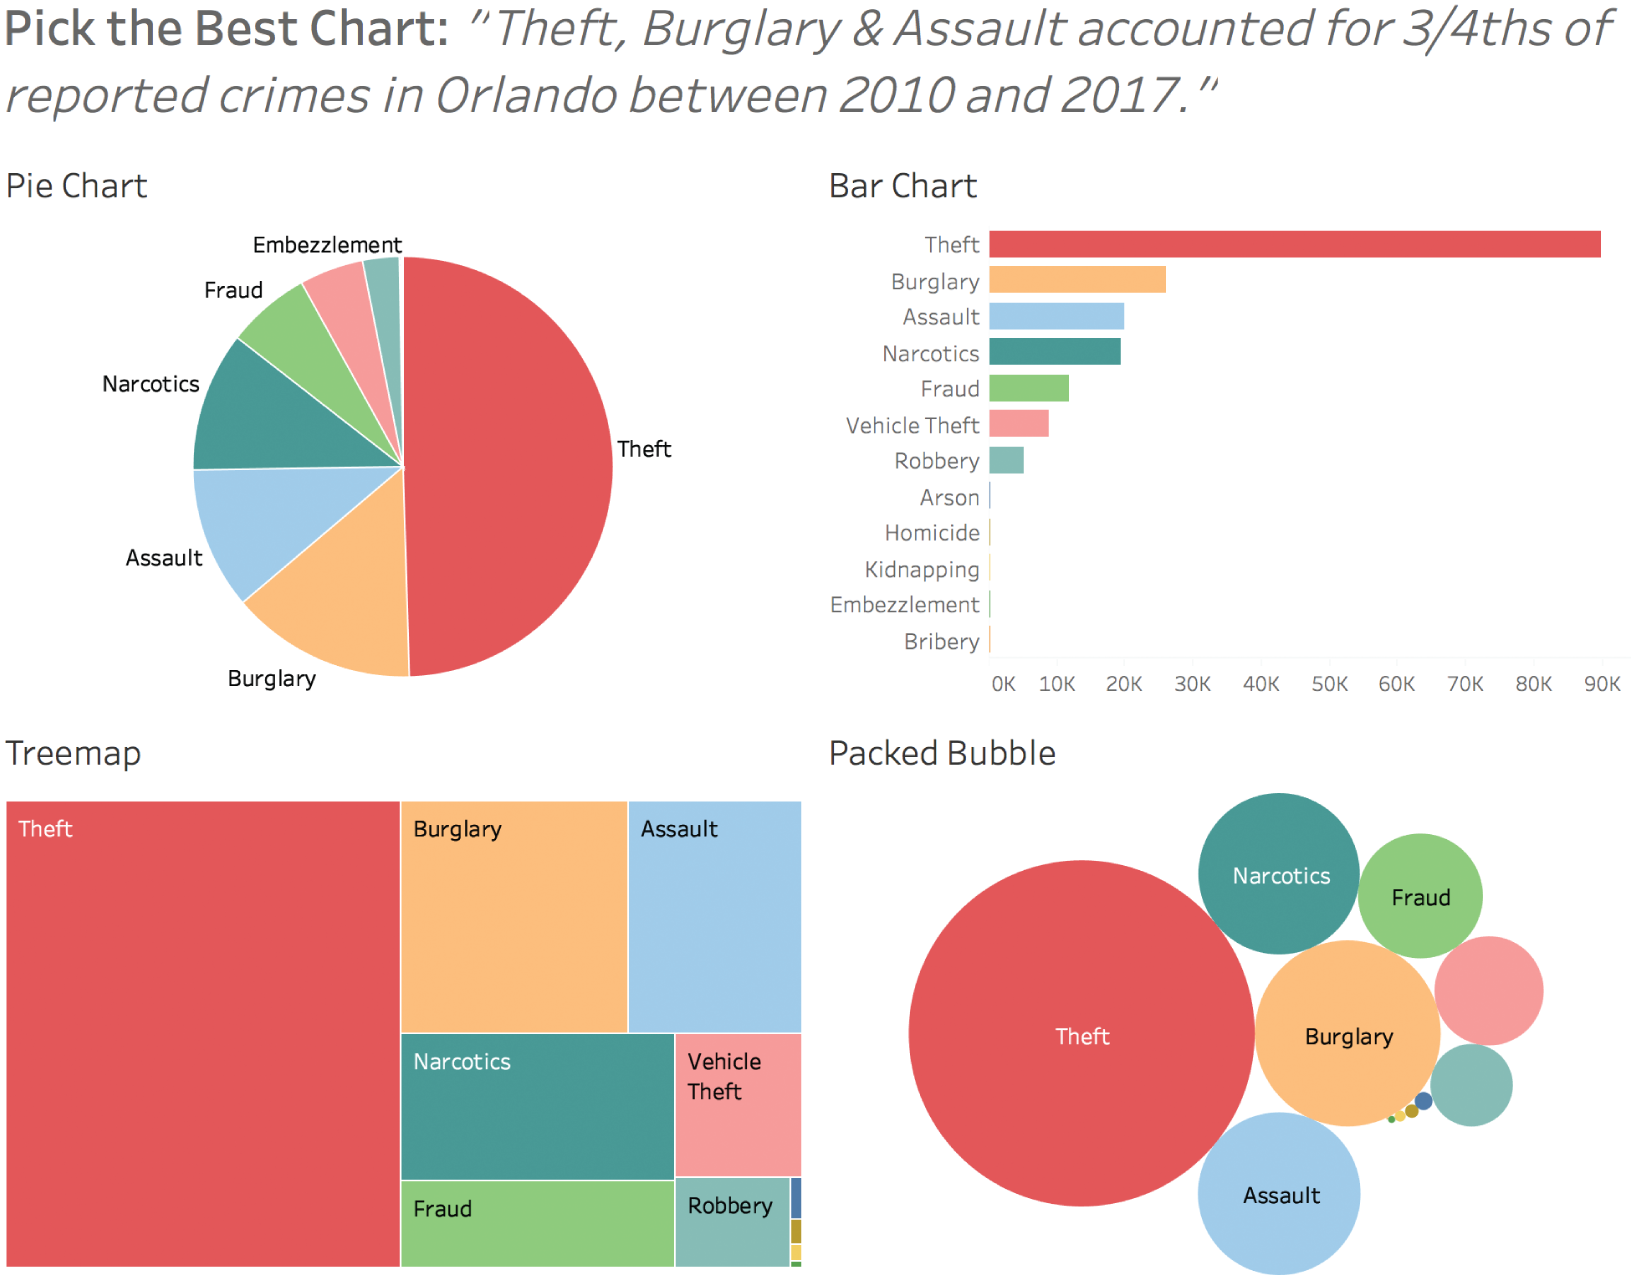 Illustration of four chart types depicting the number of reported crimes by category: Pie chart, bar chart, treemap, and packed bubble.